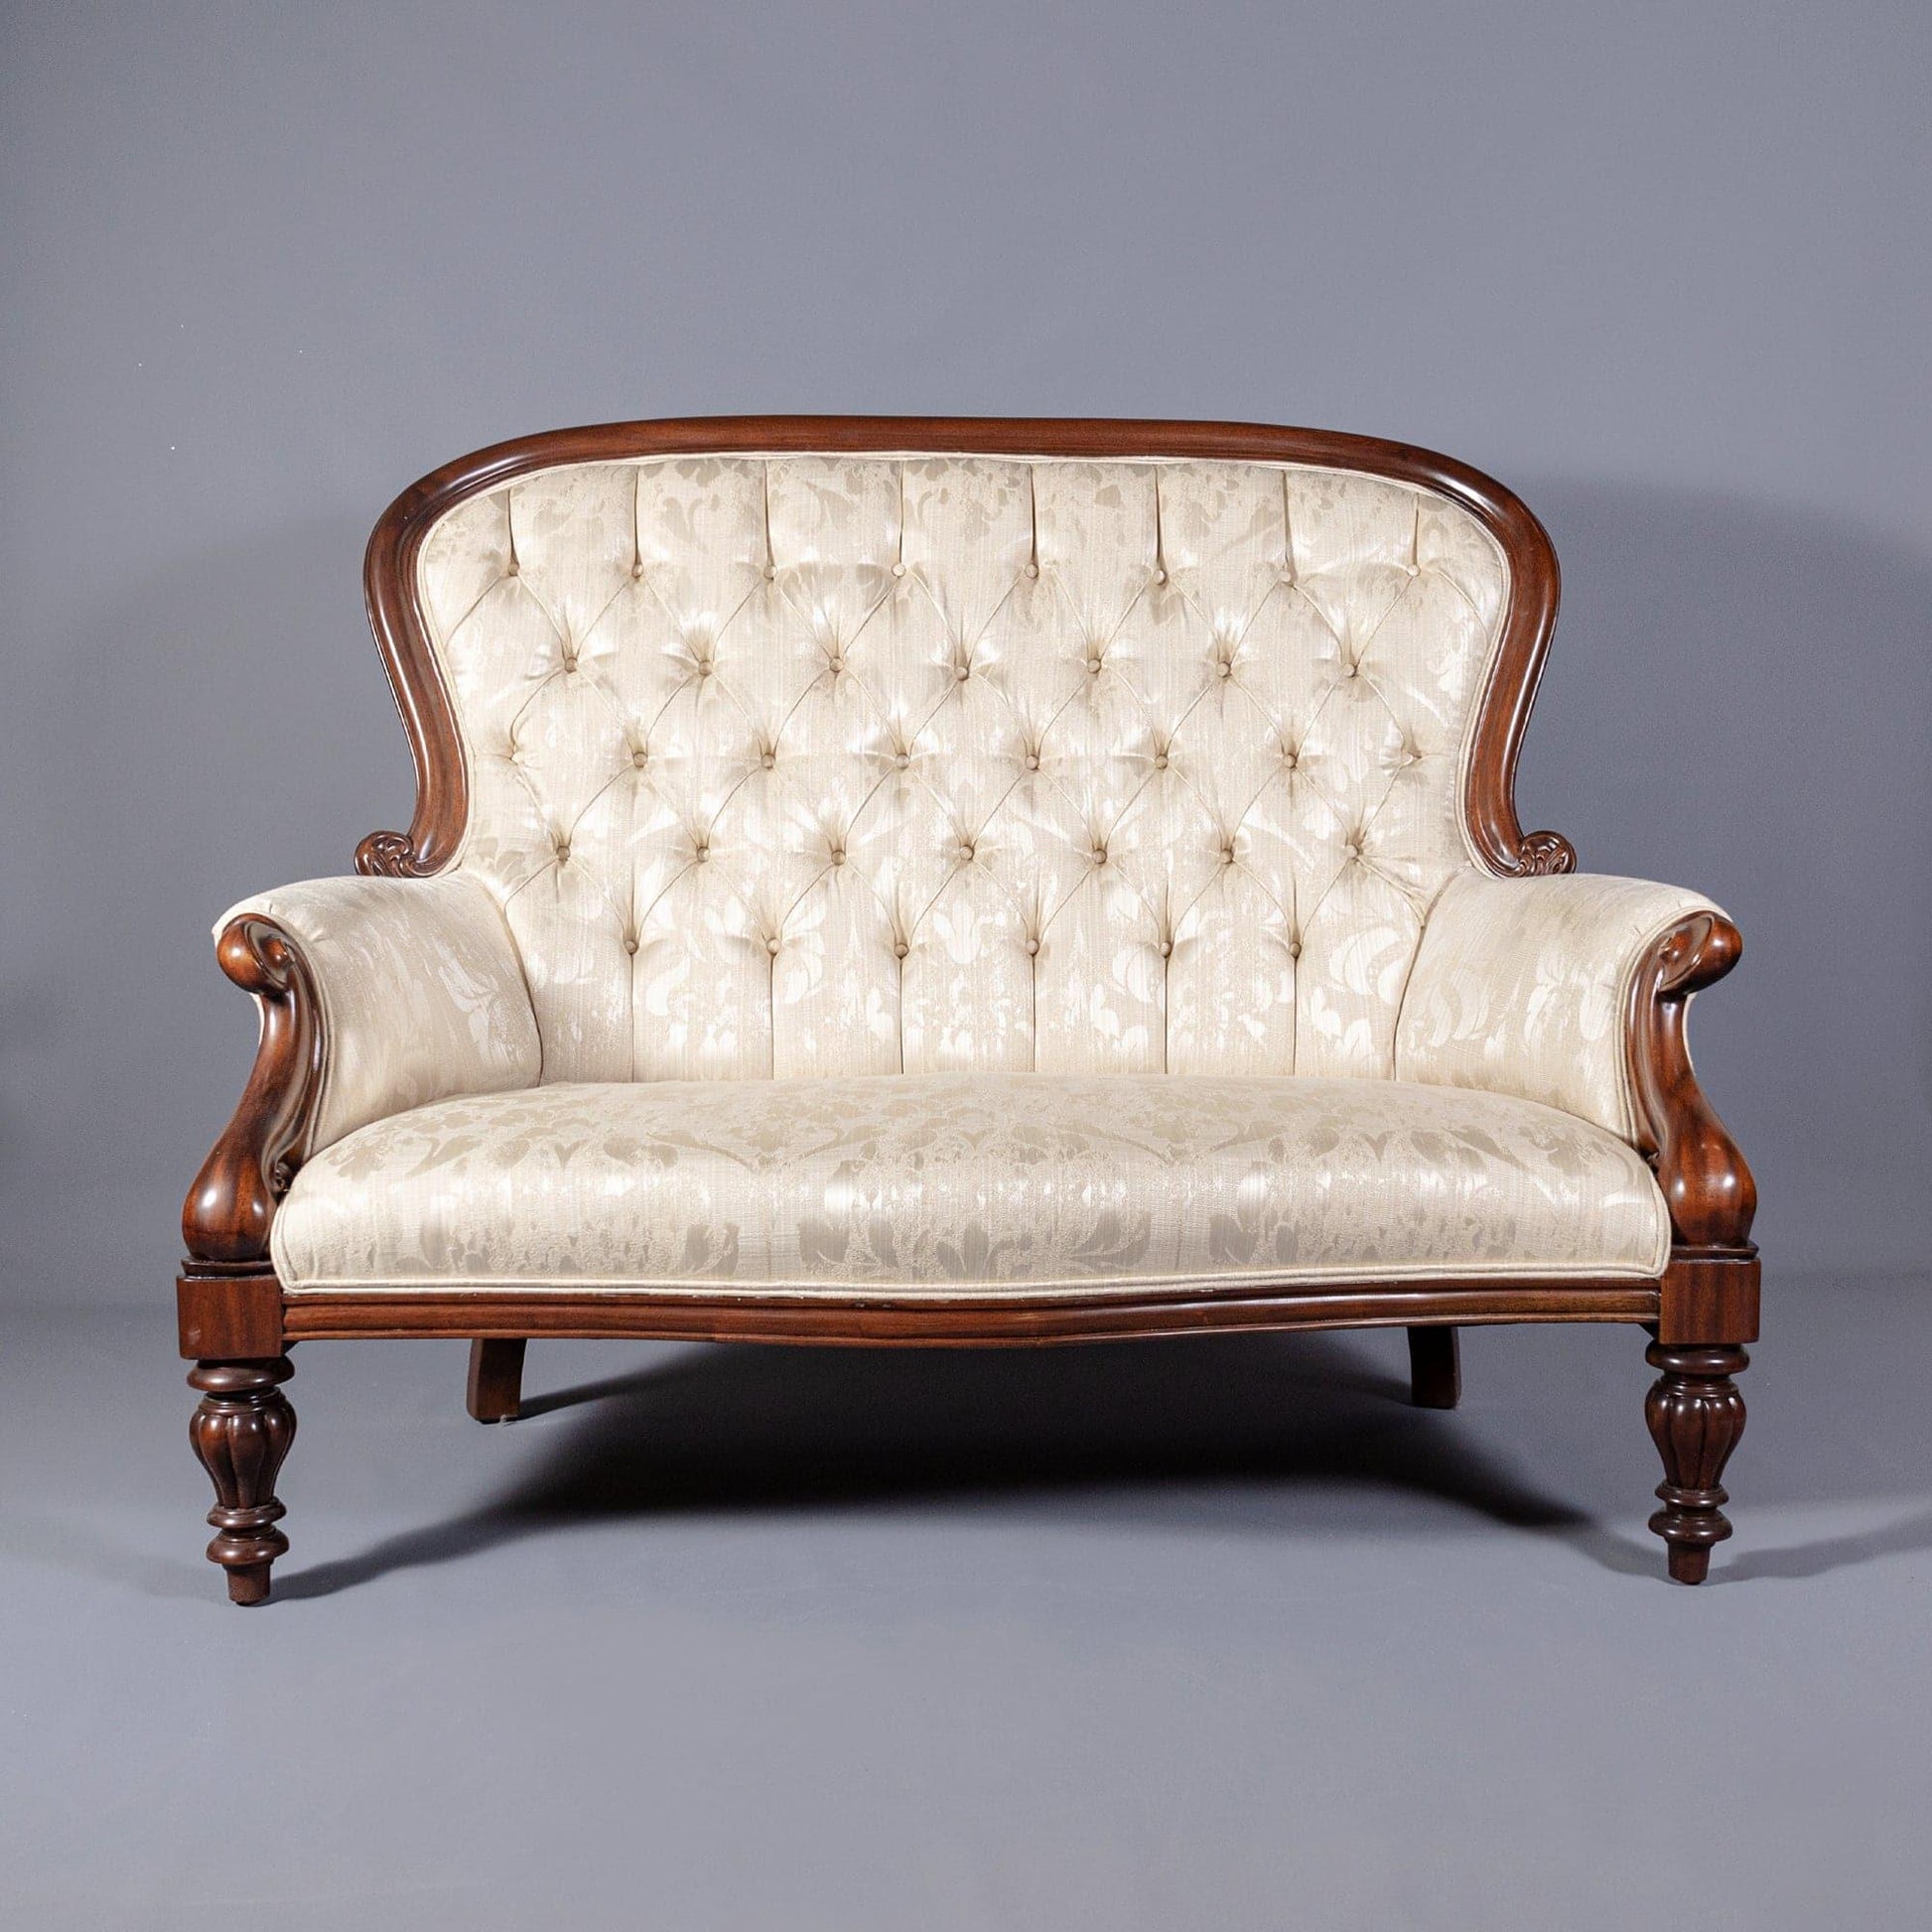 VICTORIAN STYLE LOVESEAT - House of Chippendale